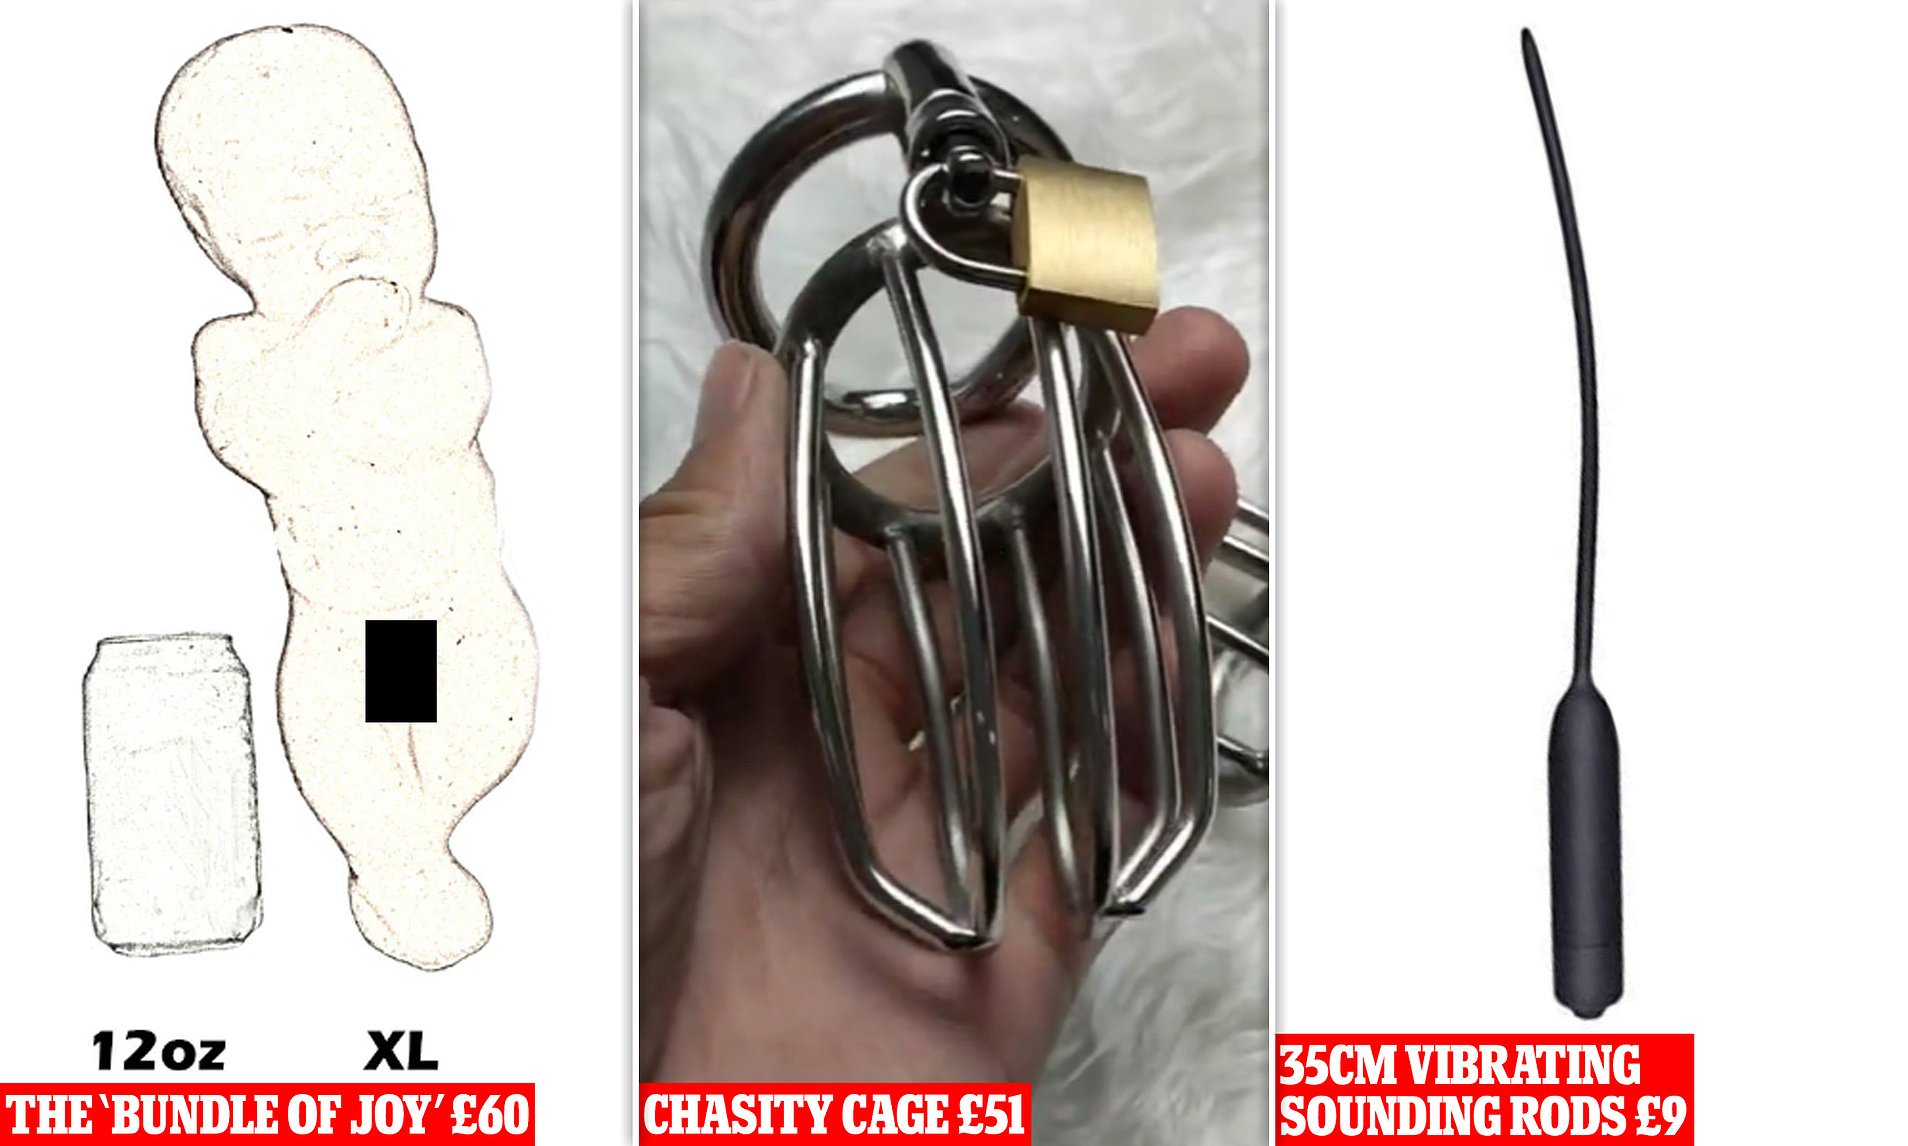 ahmed elsherbiny recommends diy chastity cage pic